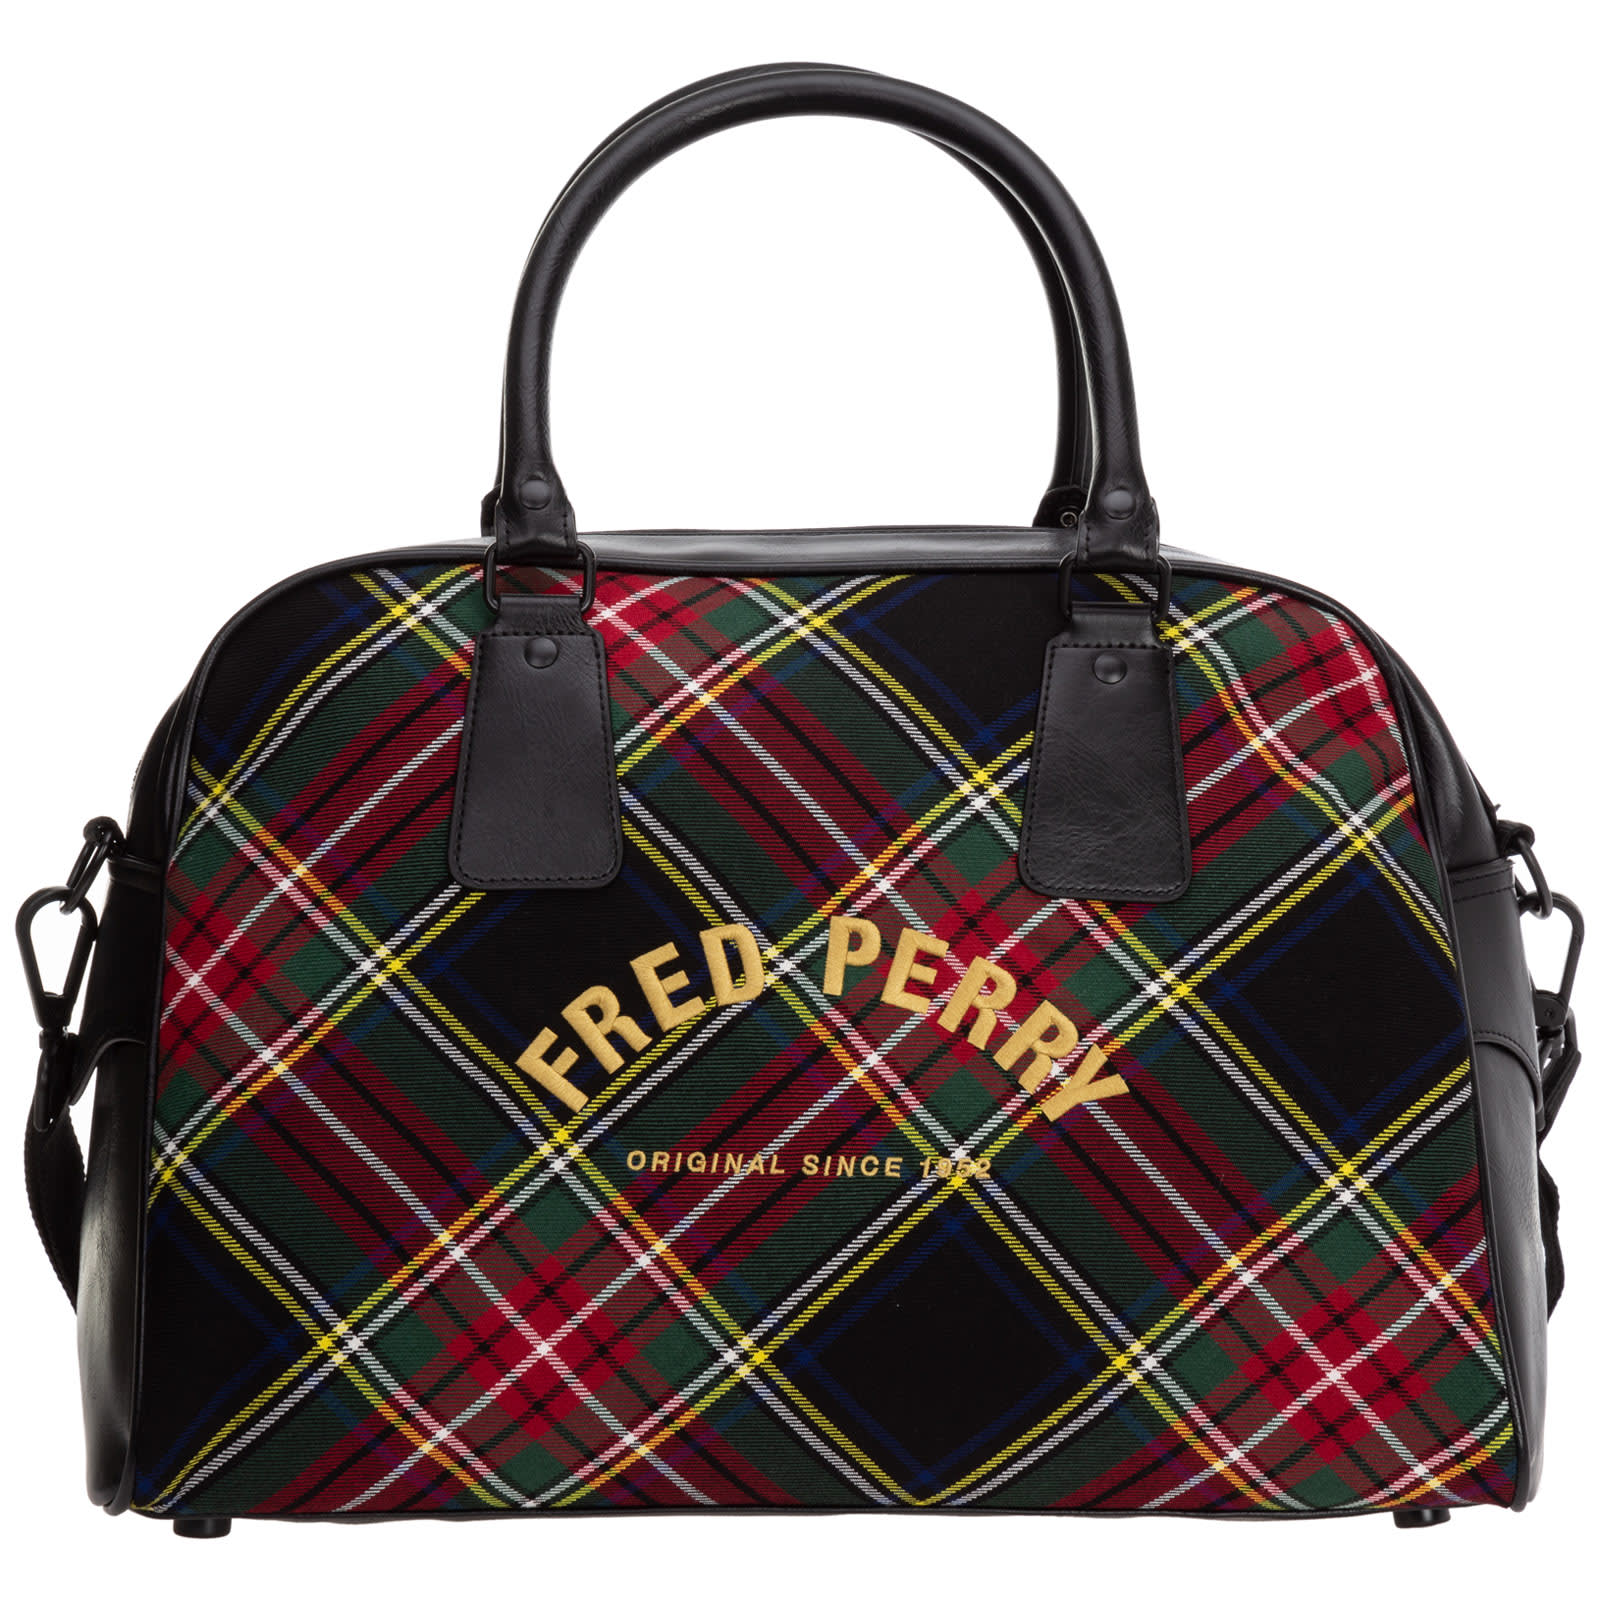 FRED PERRY FLAMES DUFFLE BAG,L1316